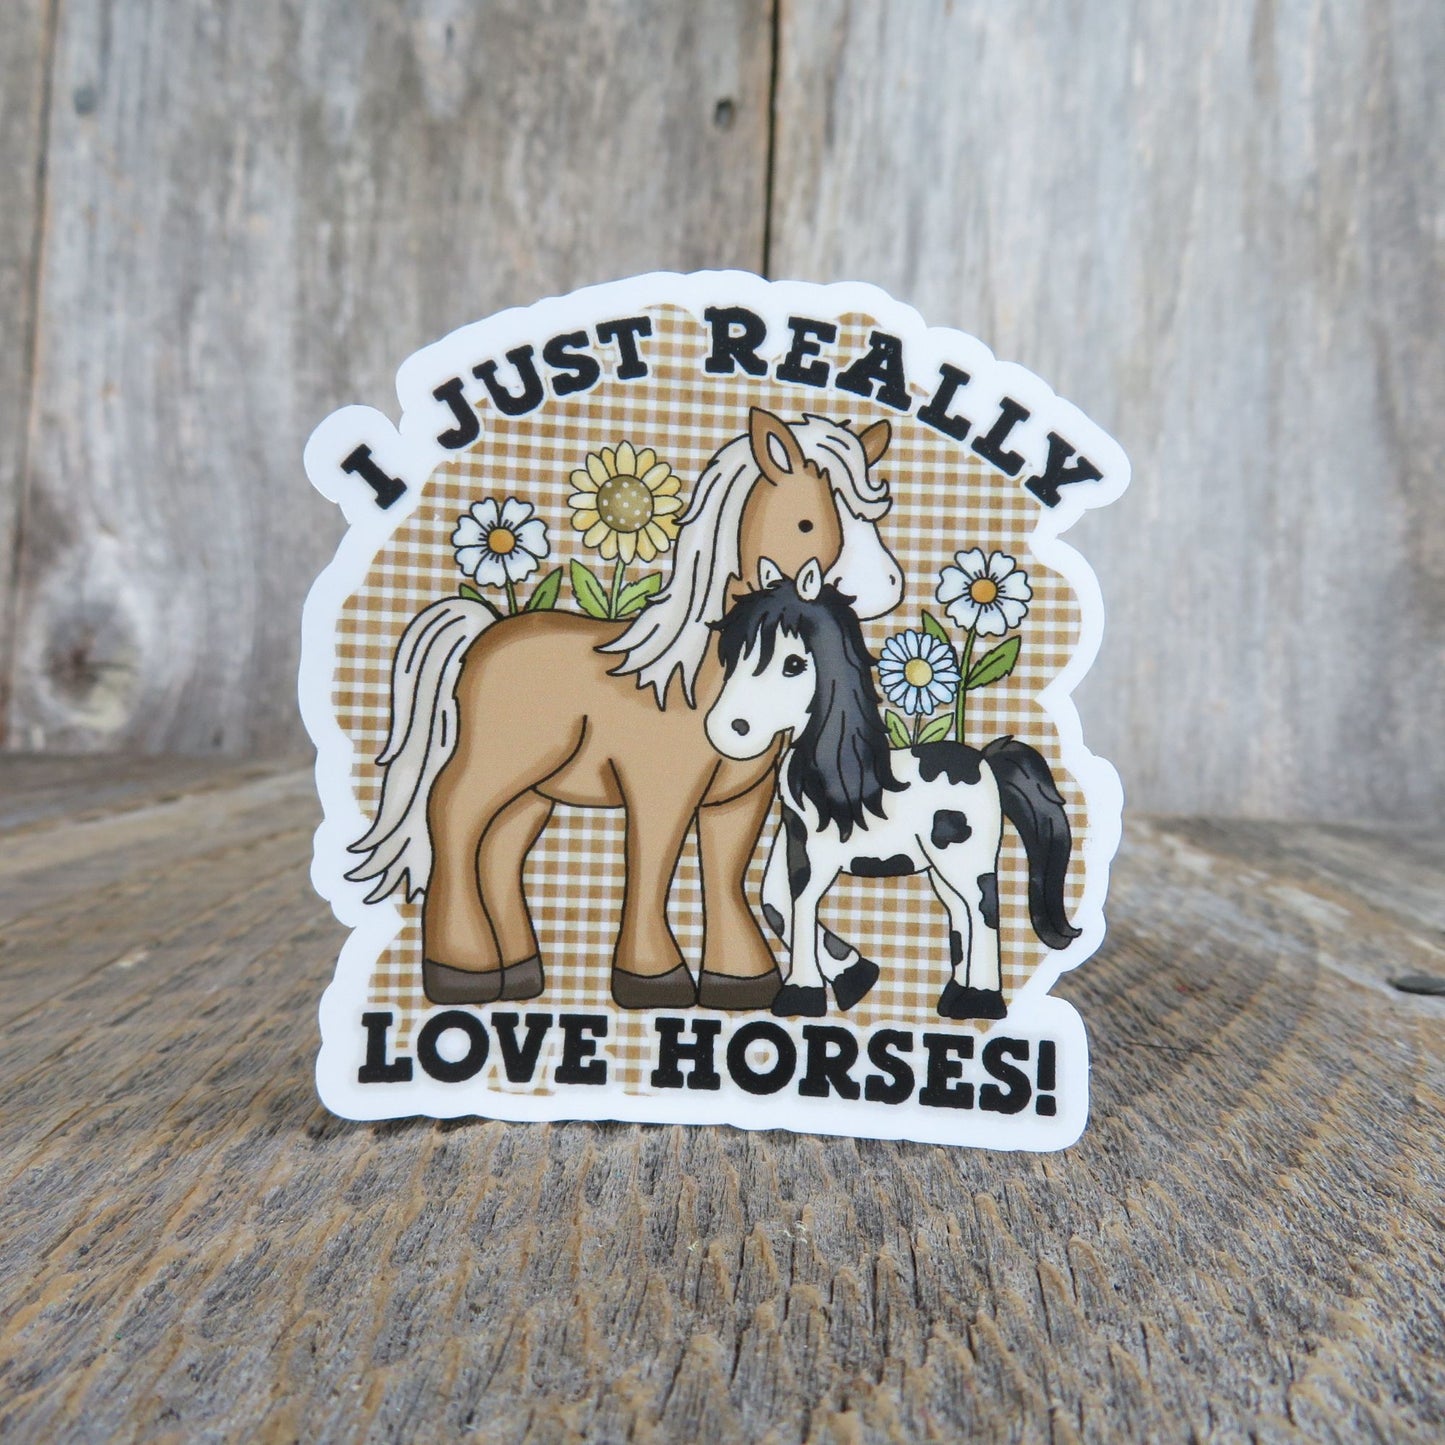 I Just Really Love Horses Sticker Waterproof Full Color Gingham Equestrian Horse Riding